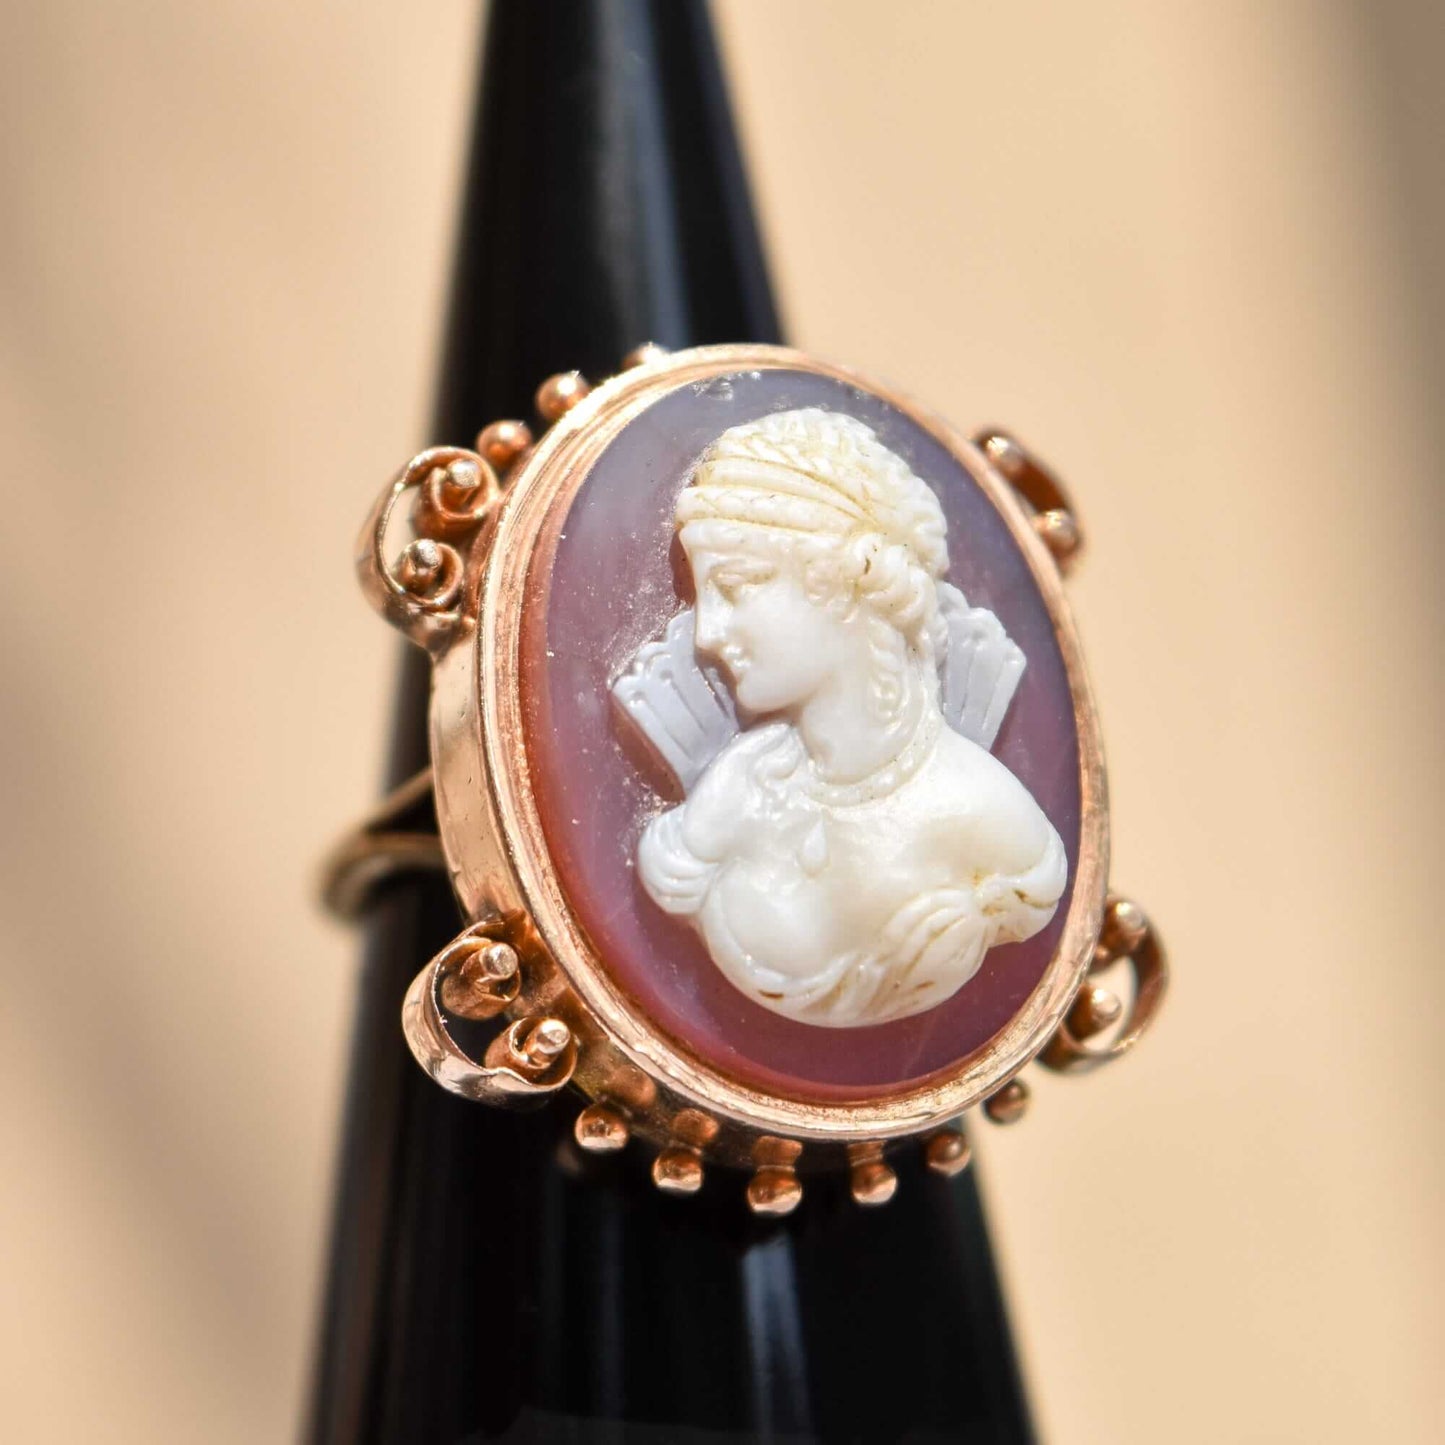 Large 14K Hardstone Cameo Ring In Rose Gold, Ornate Scroll Motifs, Estate Jewelry, Size 7 1/2 US